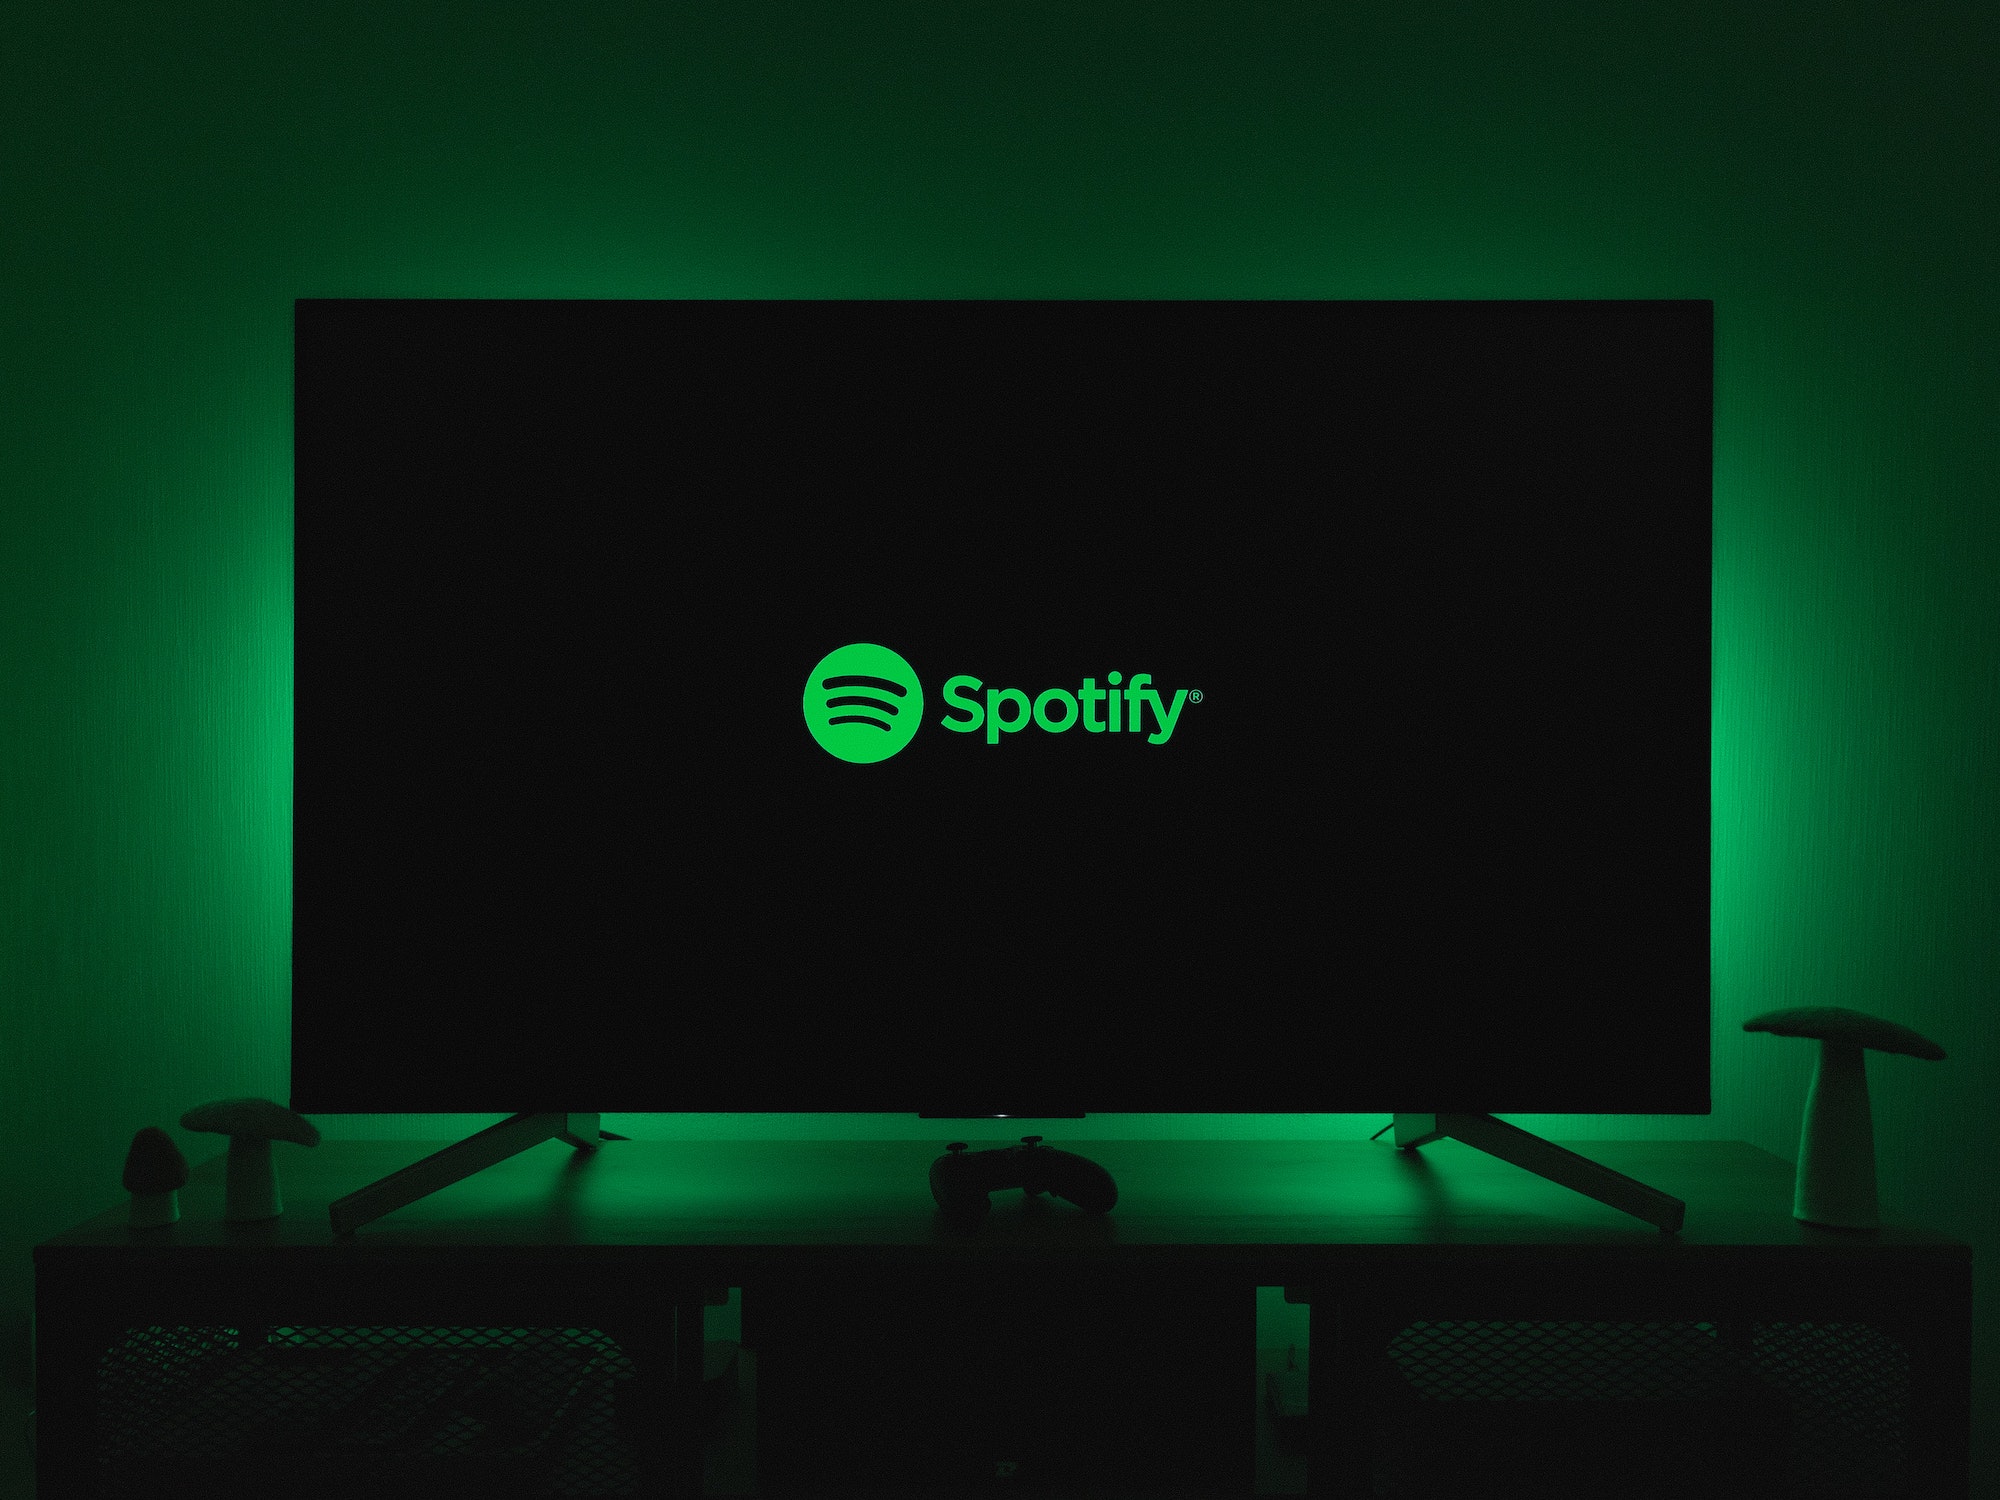 The latest movie pirating tool: Spotify’s ‘video podcast’